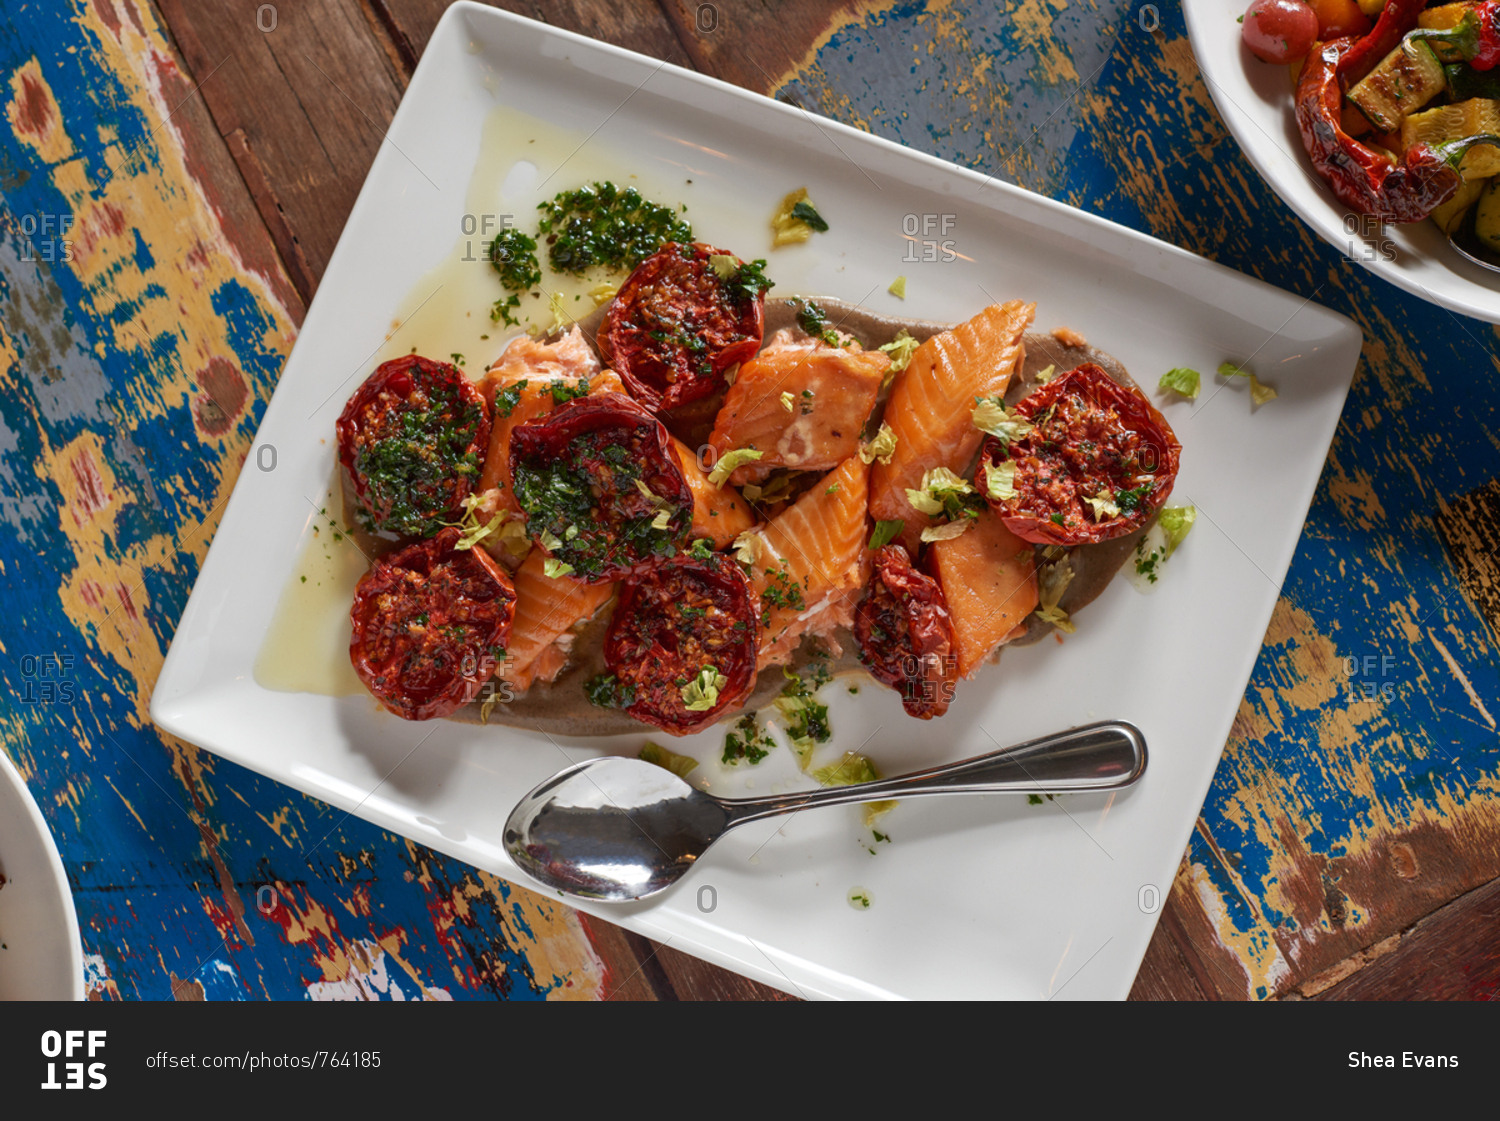 King Salmon portioned into diamond shapes served with grilled tomatoes, chimichurri, celery leaves and an eggplant puree, featured on a square plate on a colorful surface.